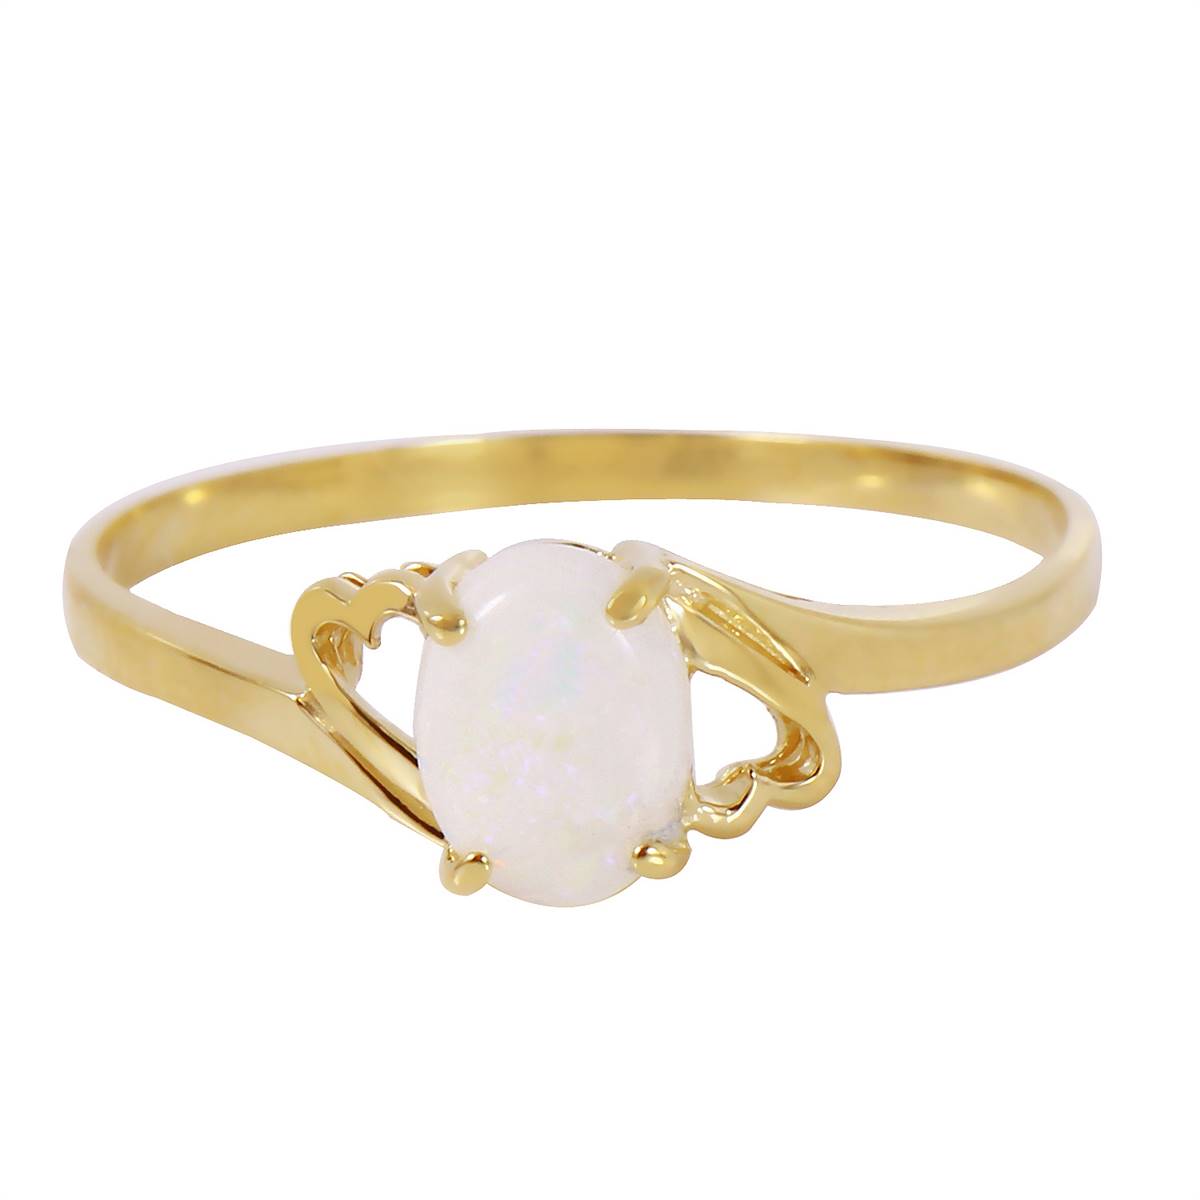 0.45 Carat 14K Solid Yellow Gold Nearly Bare Opal Ring